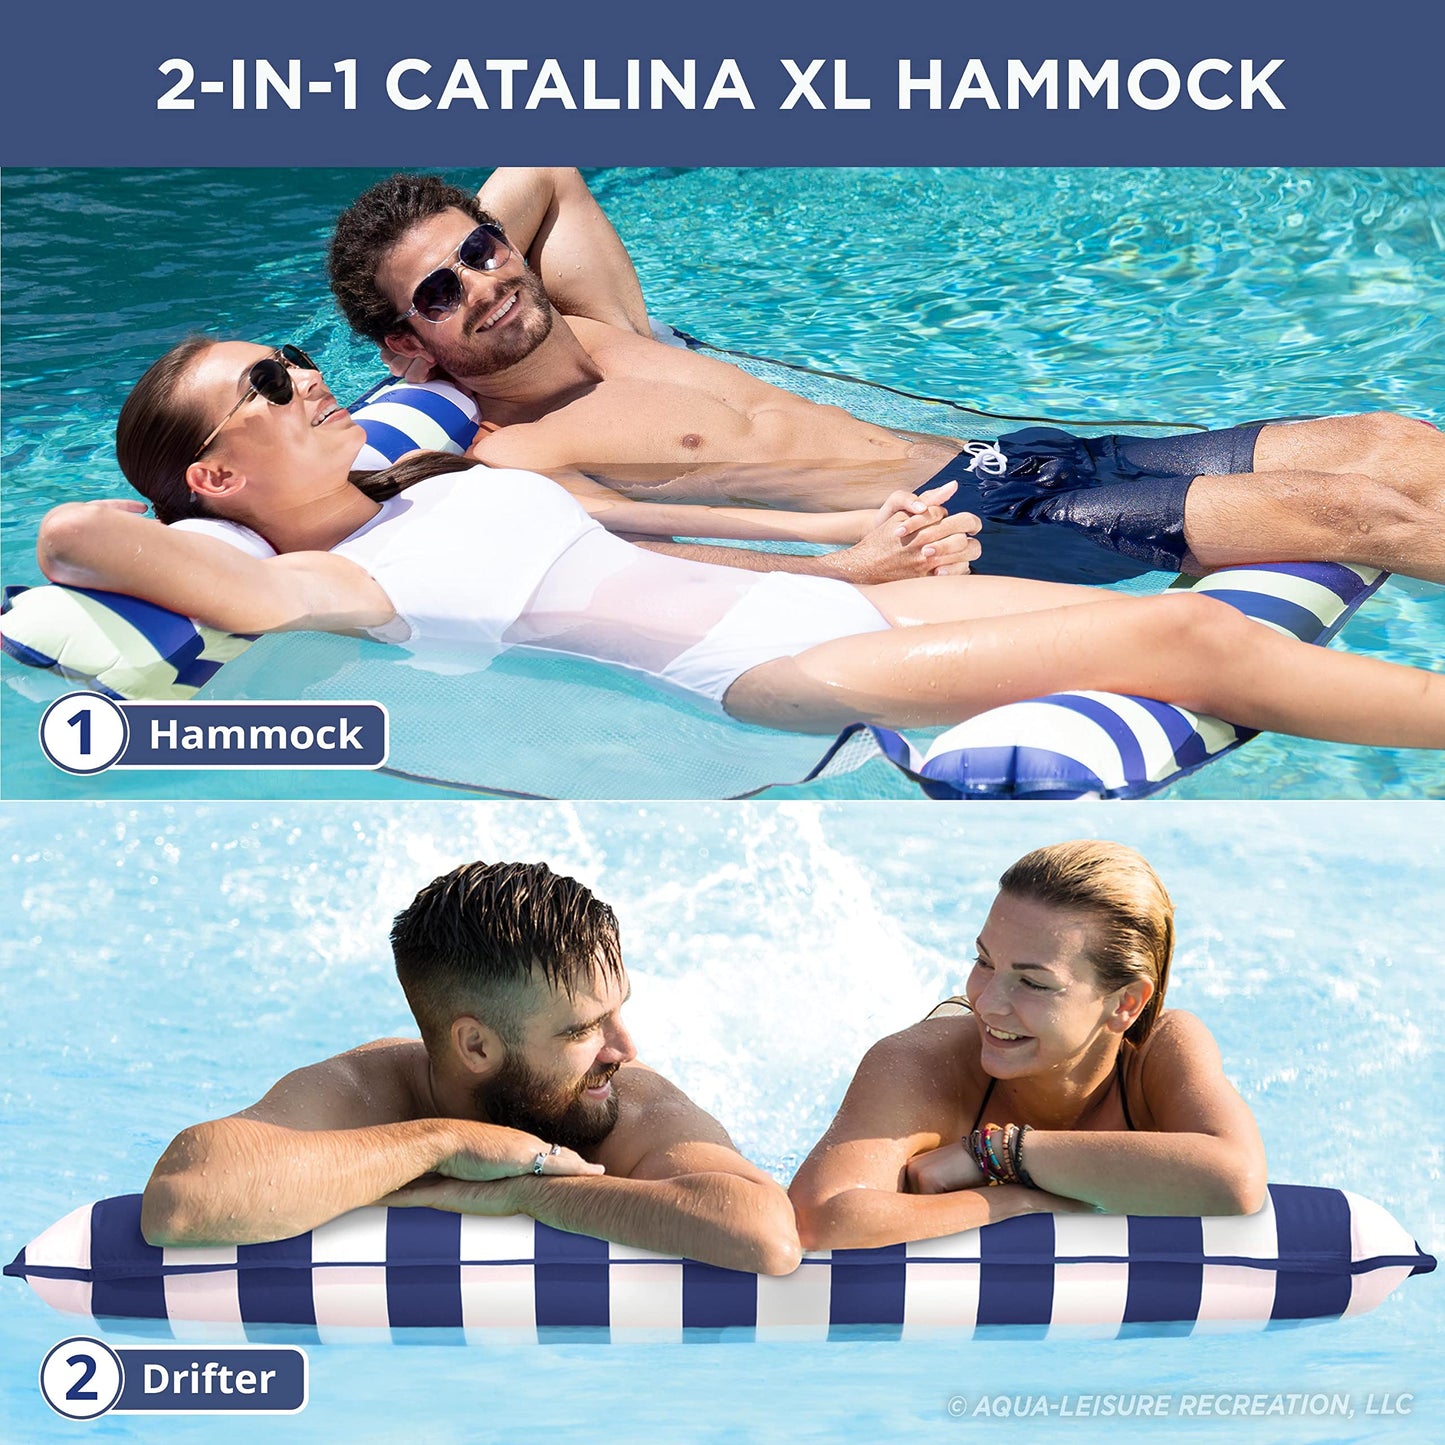 Aqua Original 4-in-1 Monterey Hammock Pool Float & Water Hammock – Multi-Purpose, Inflatable Pool Floats for Adults – Patented Thick, Non-Stick PVC Material Navy 1-2 Person Xl Hammock